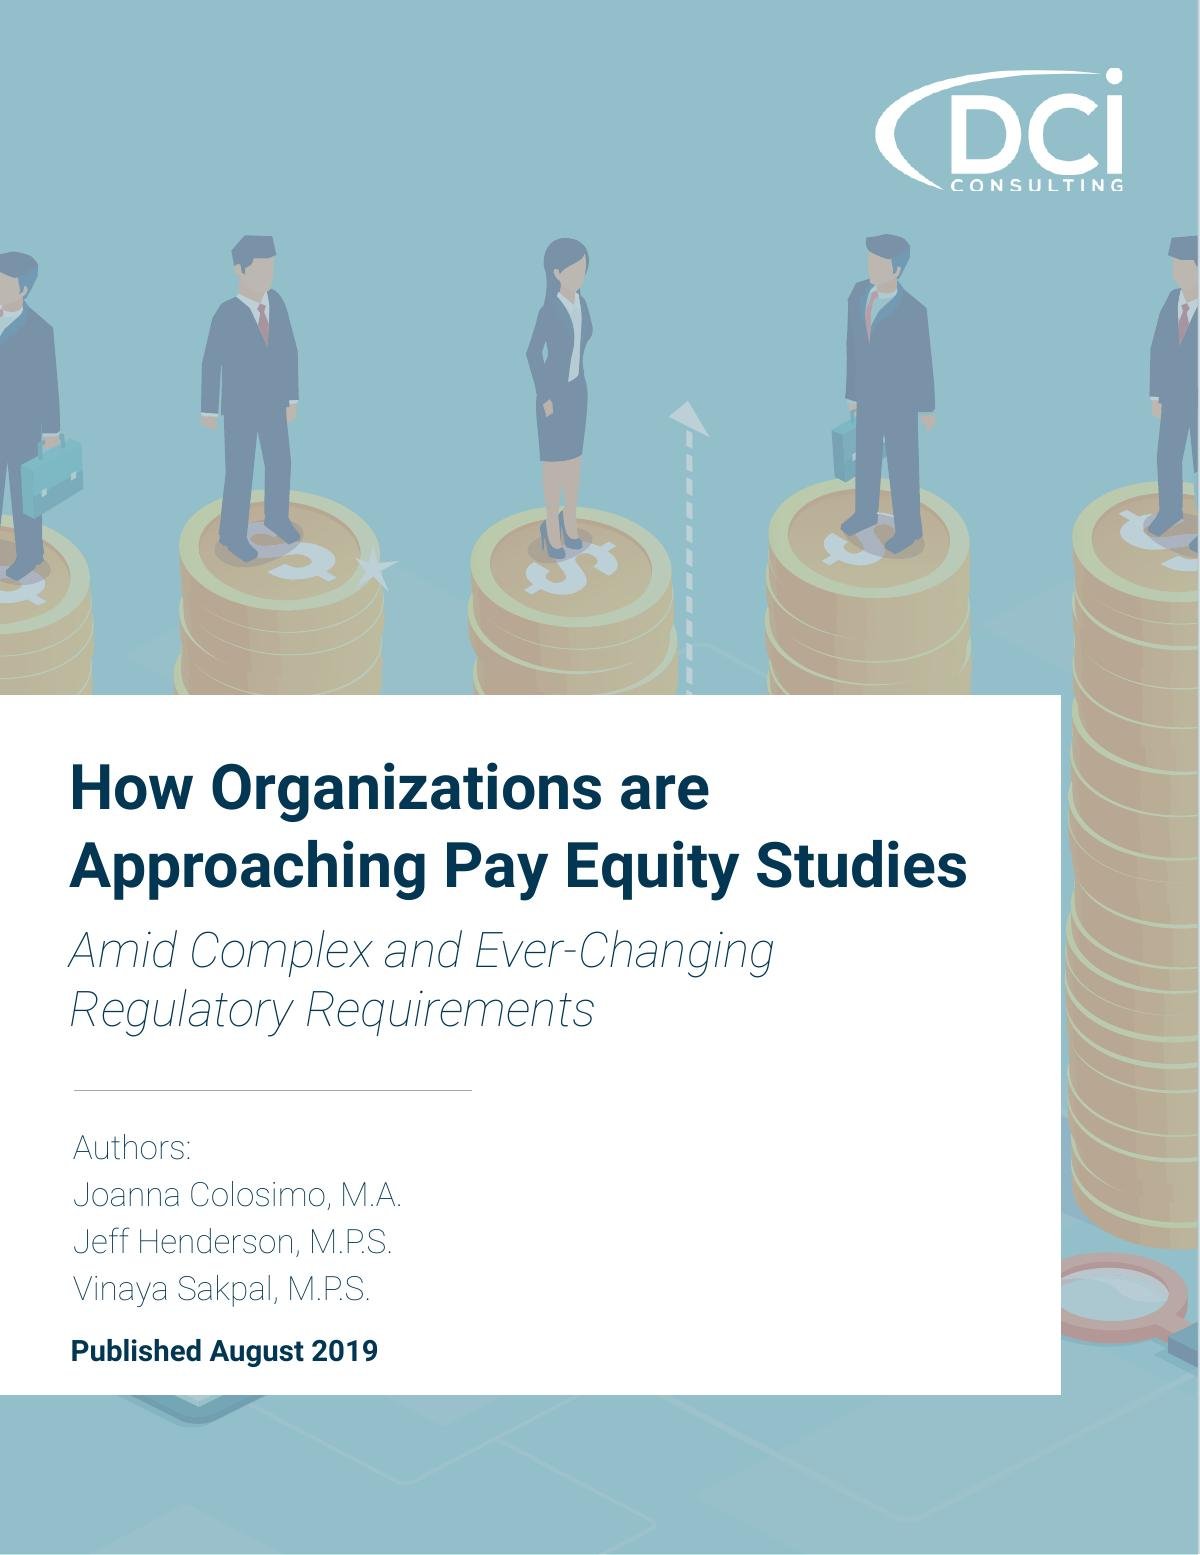 How Organizations are Approaching Pay Equity Studies